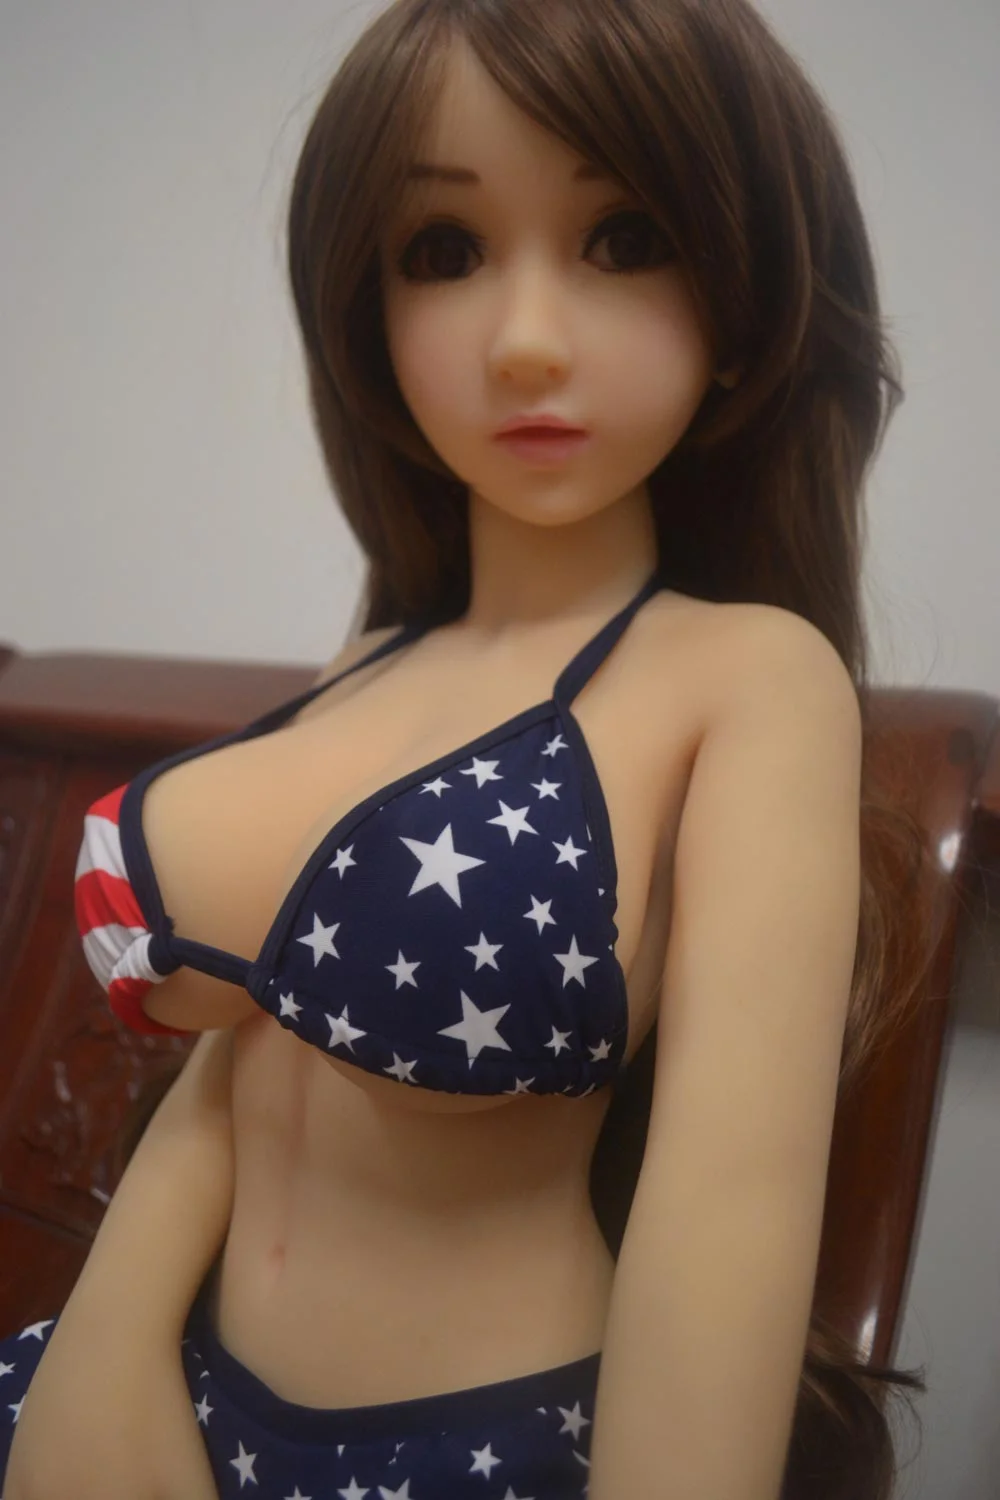 Brown haired mini sex doll